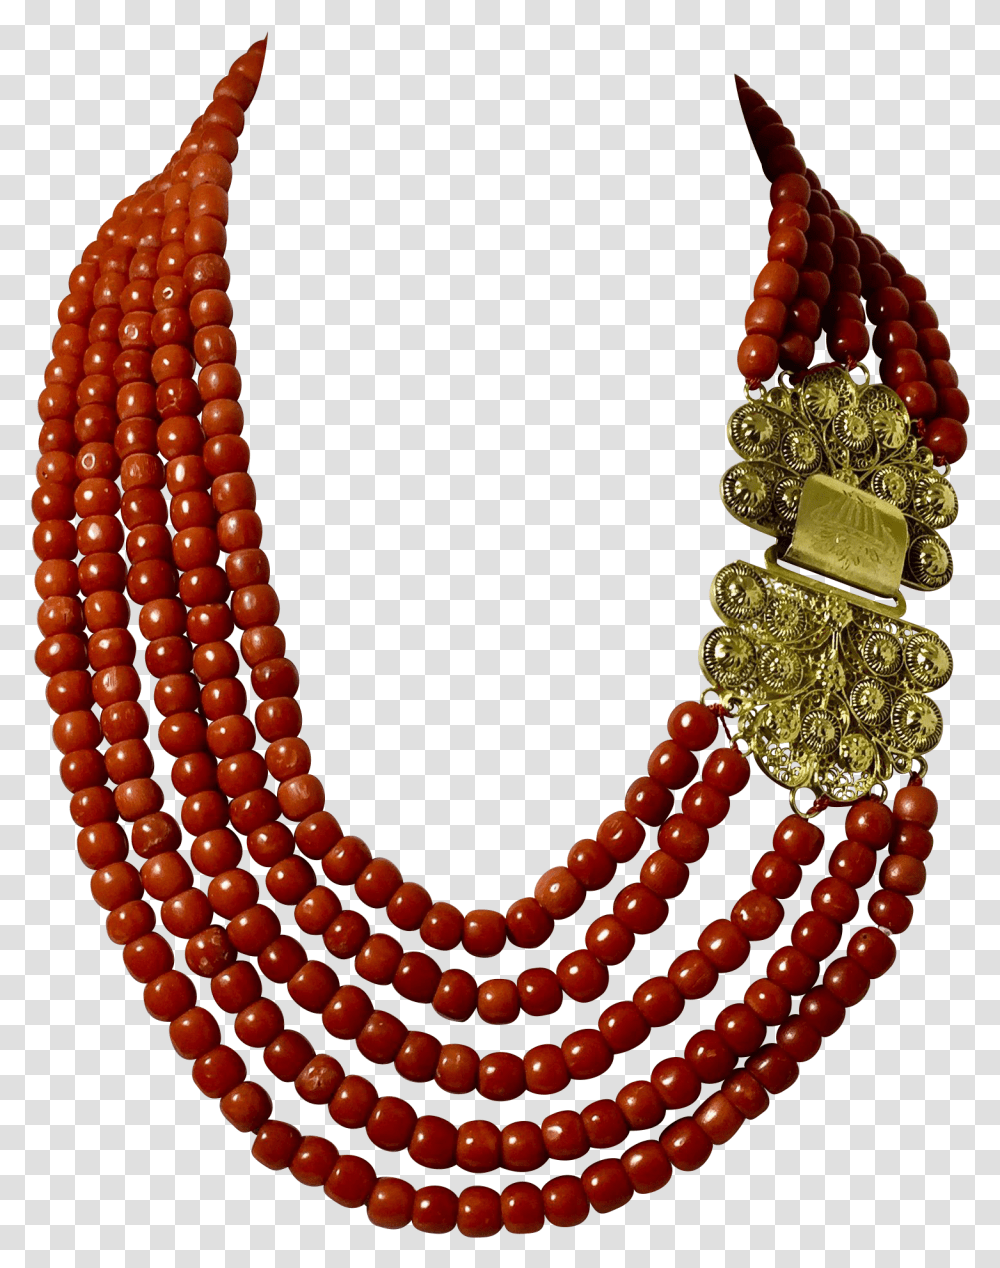 Clip Beads African Gold Beads Necklace, Bead Necklace, Jewelry, Ornament, Accessories Transparent Png